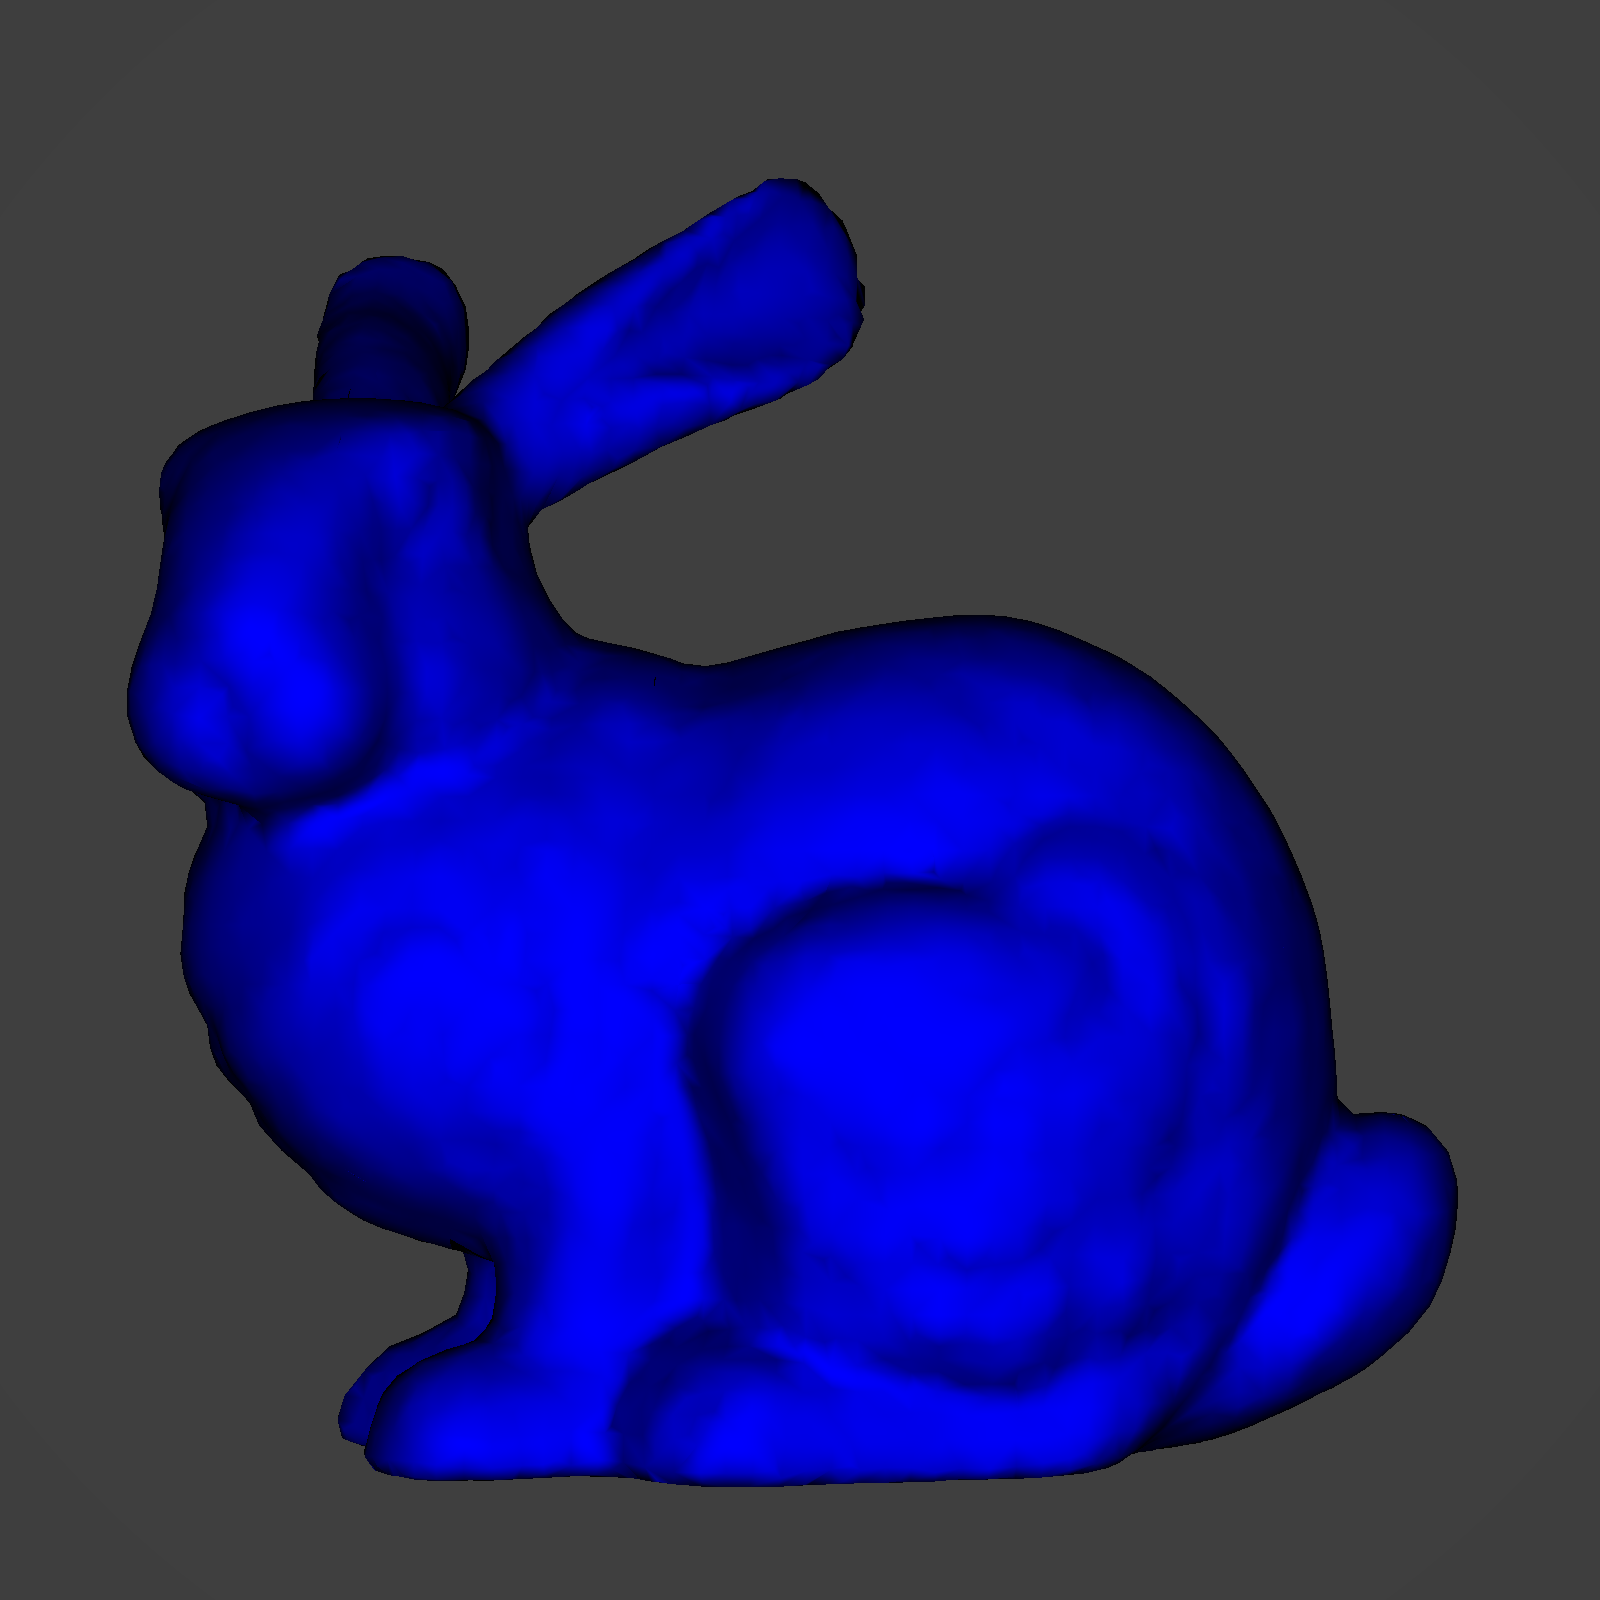 Stanford bunny with smooth shading